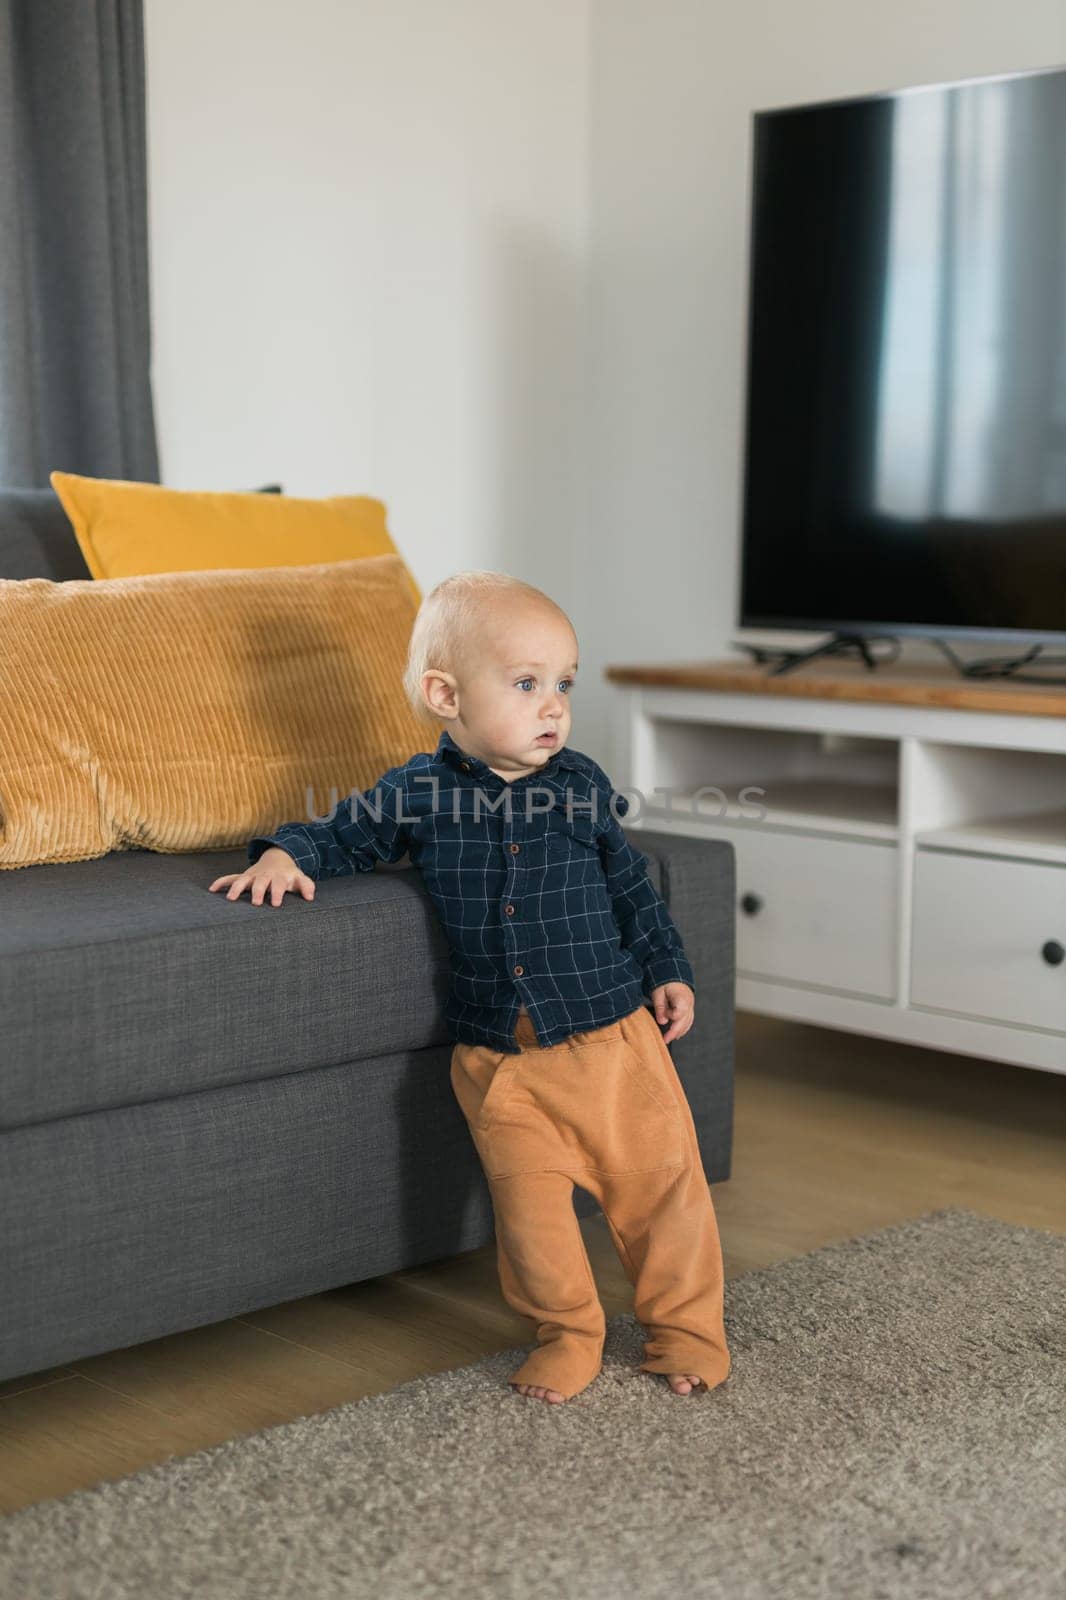 Toddler boy laughing having fun standing near sofa in living room at home. Adorable baby making first steps alone. Happy childhood and child care concept by Satura86